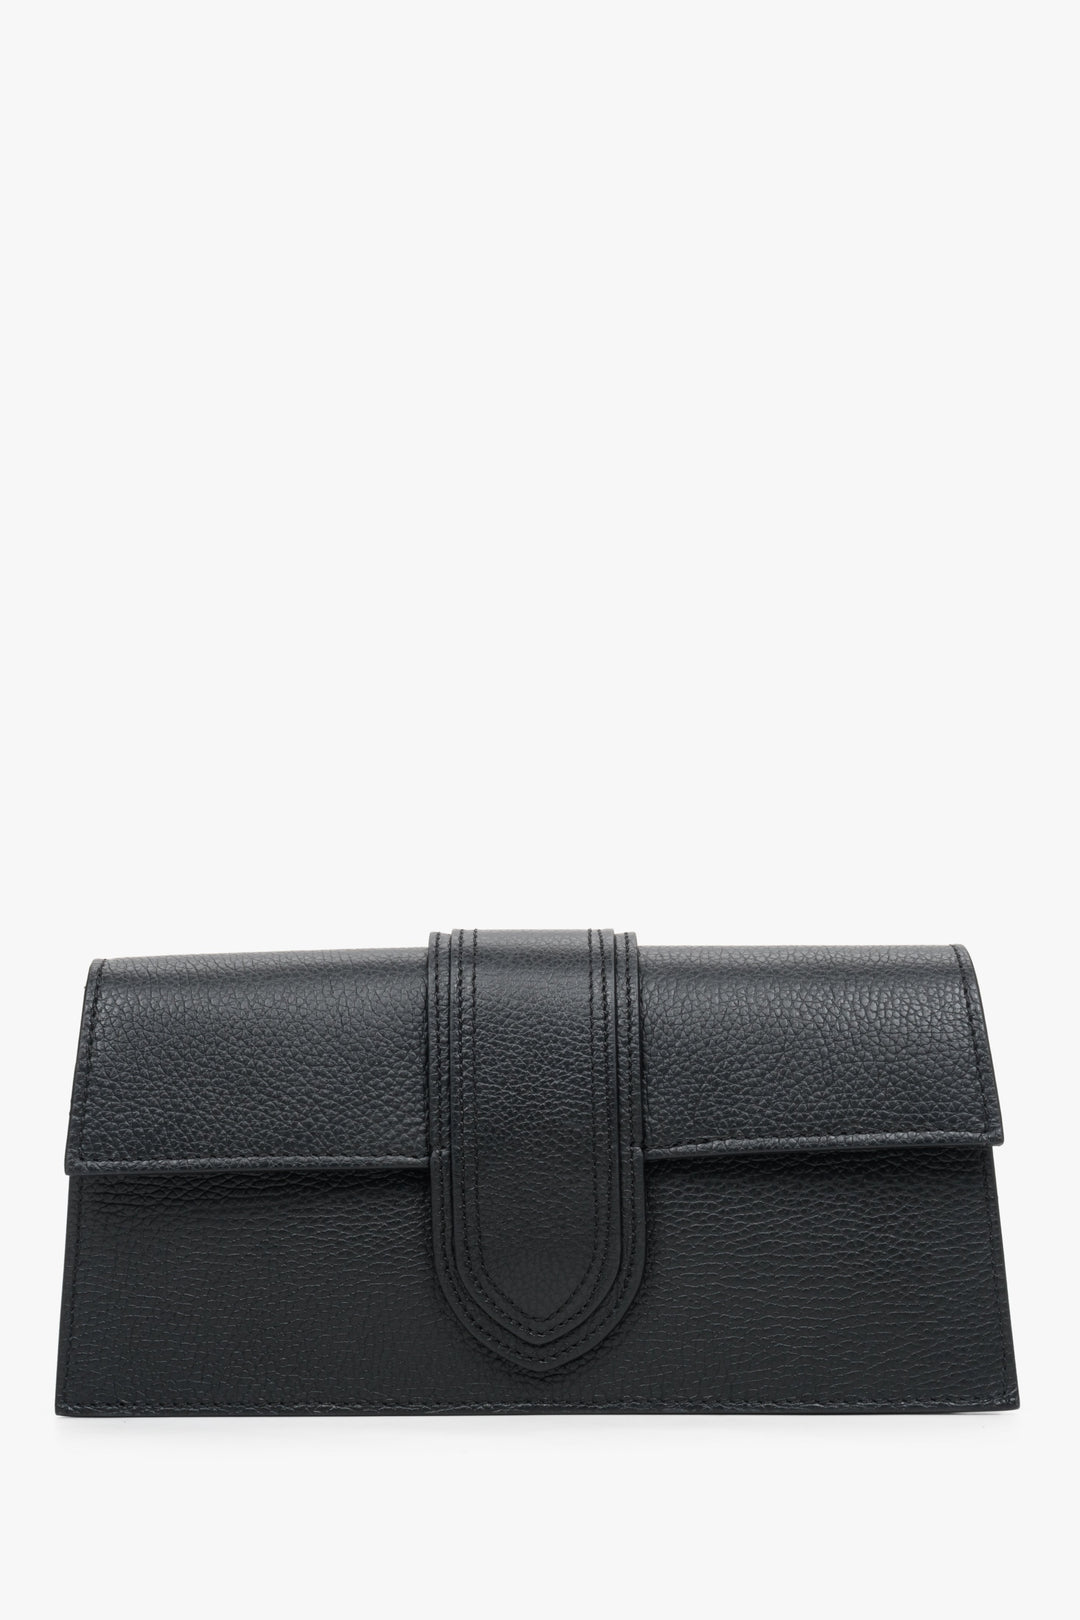 Women's leather handbag in black by Estro - presentation of the model without a strap.